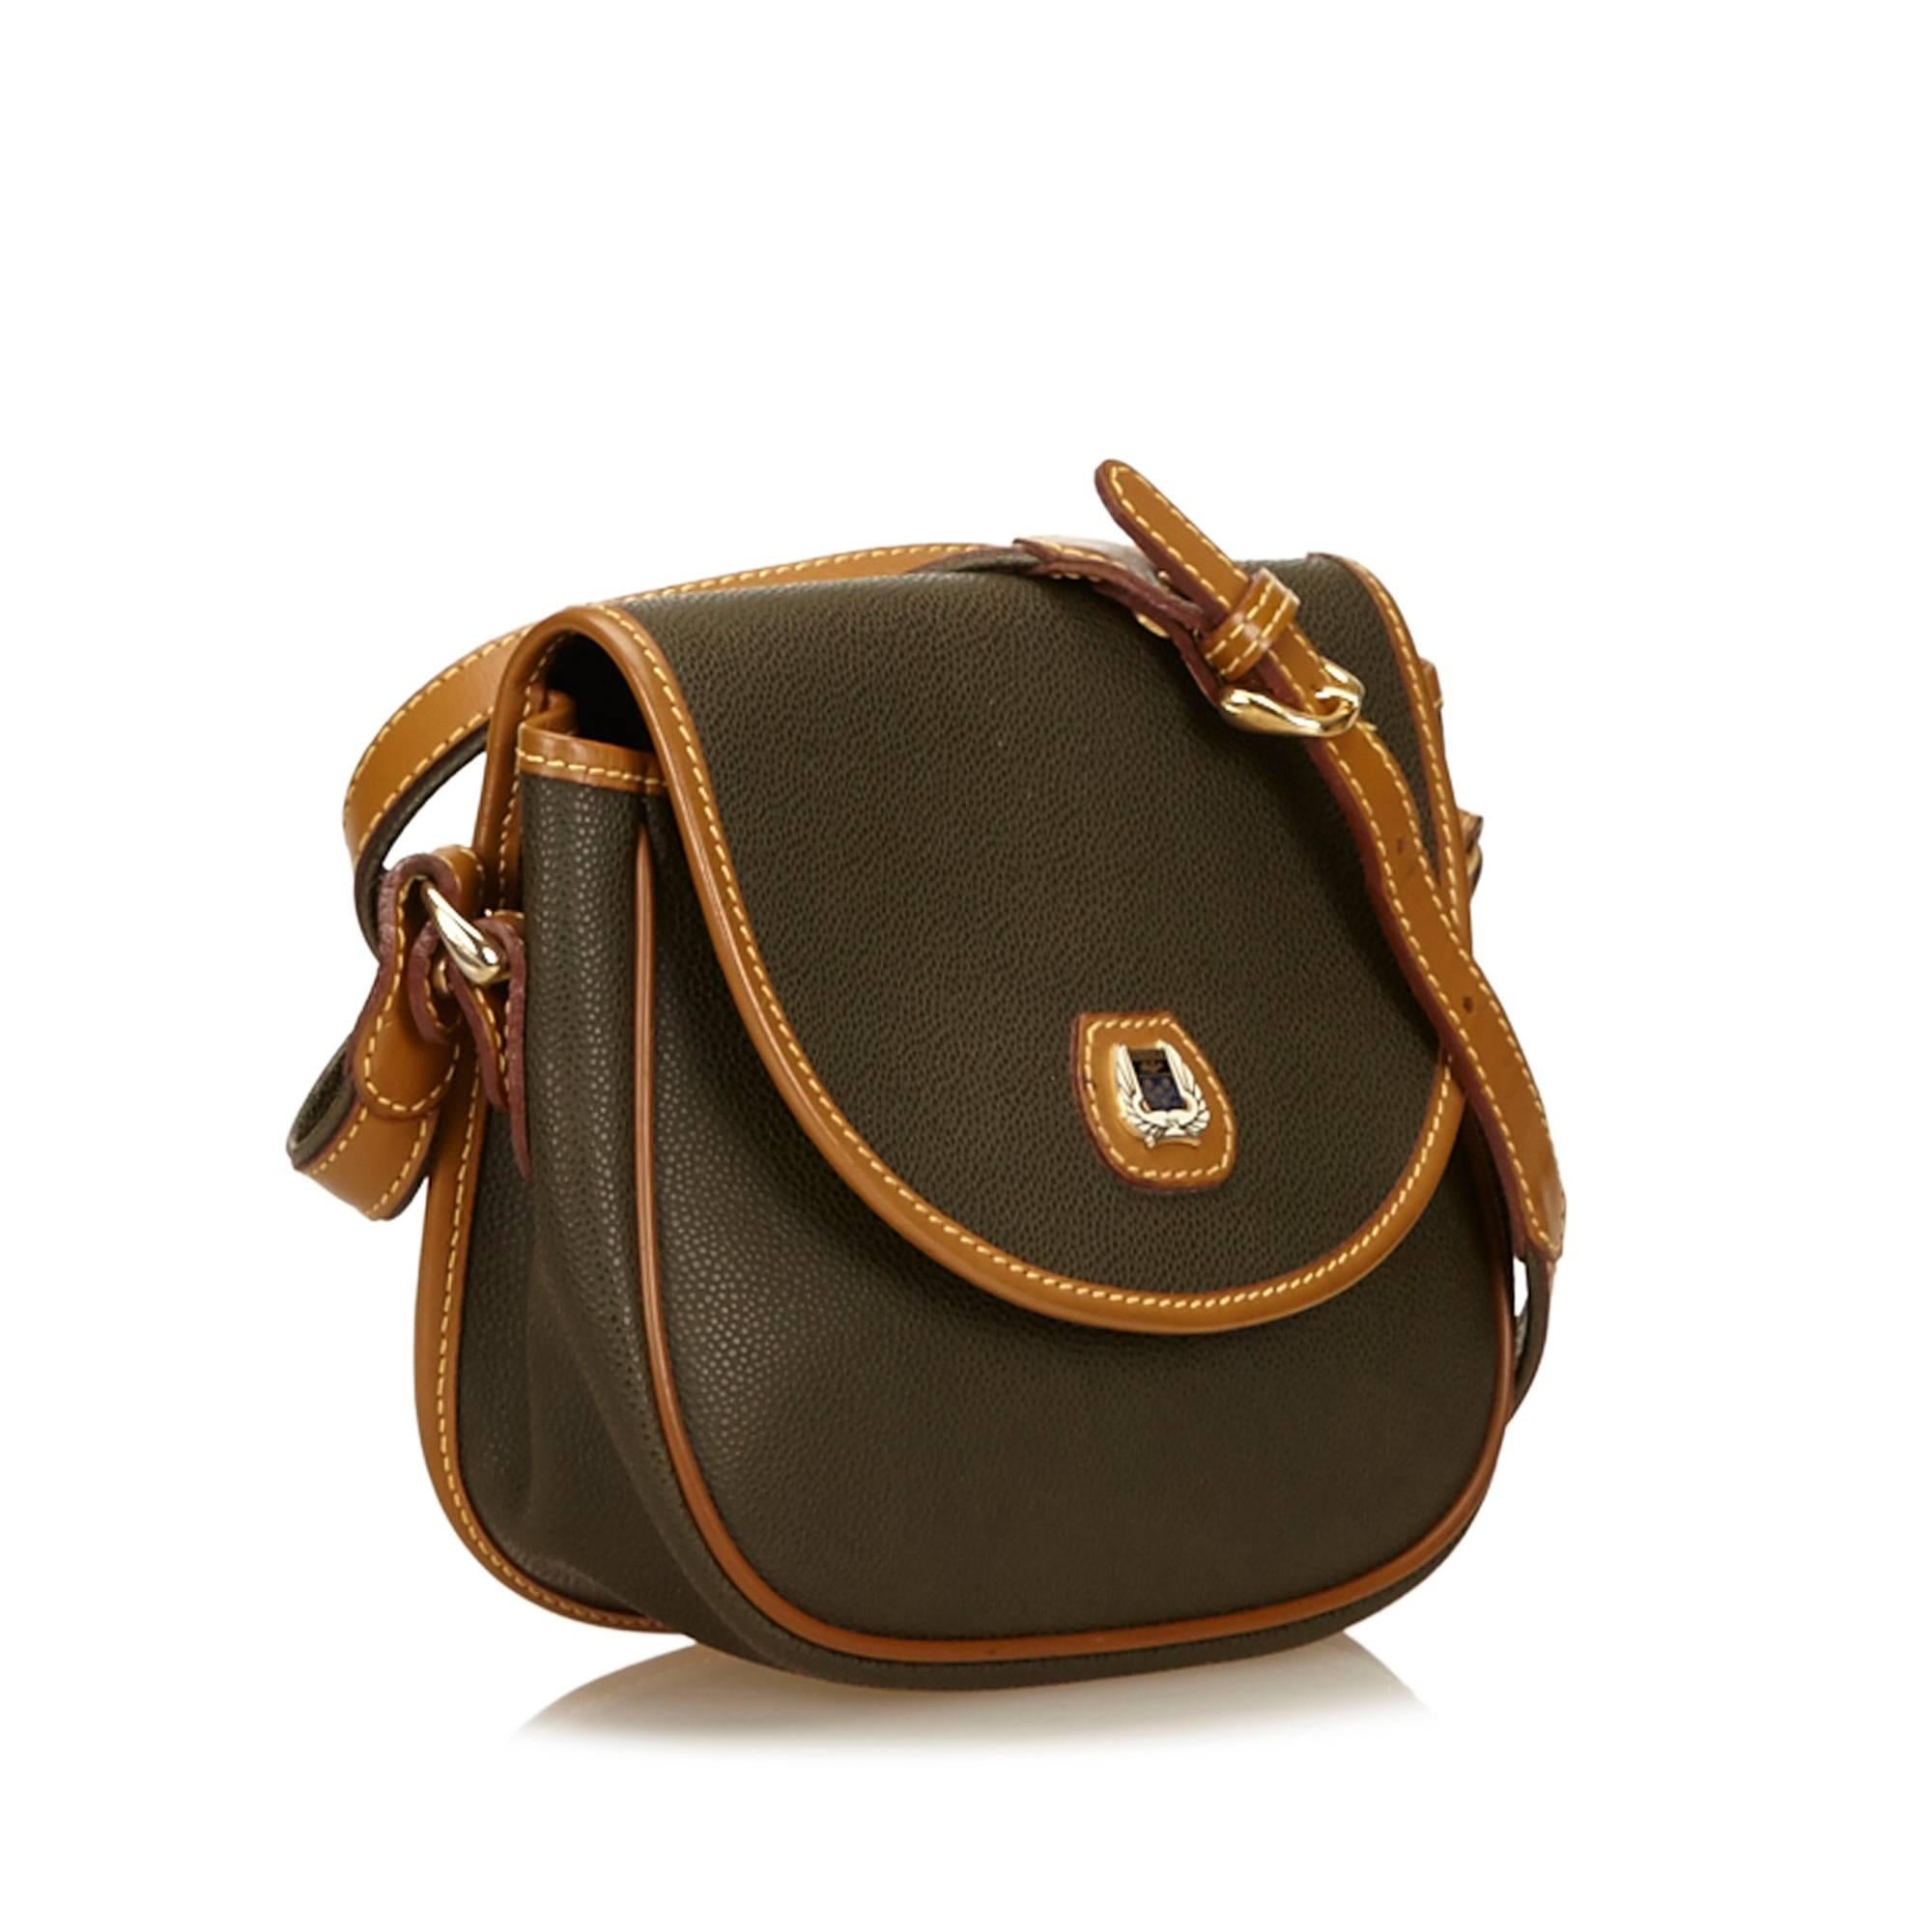 This shoulder bag features an embossed leather body, a flat strap, a front flap with a magnetic closure, and an interior zip pocket. It carries a B condition rating.

Inclusions: 
This item does not come with inclusions.